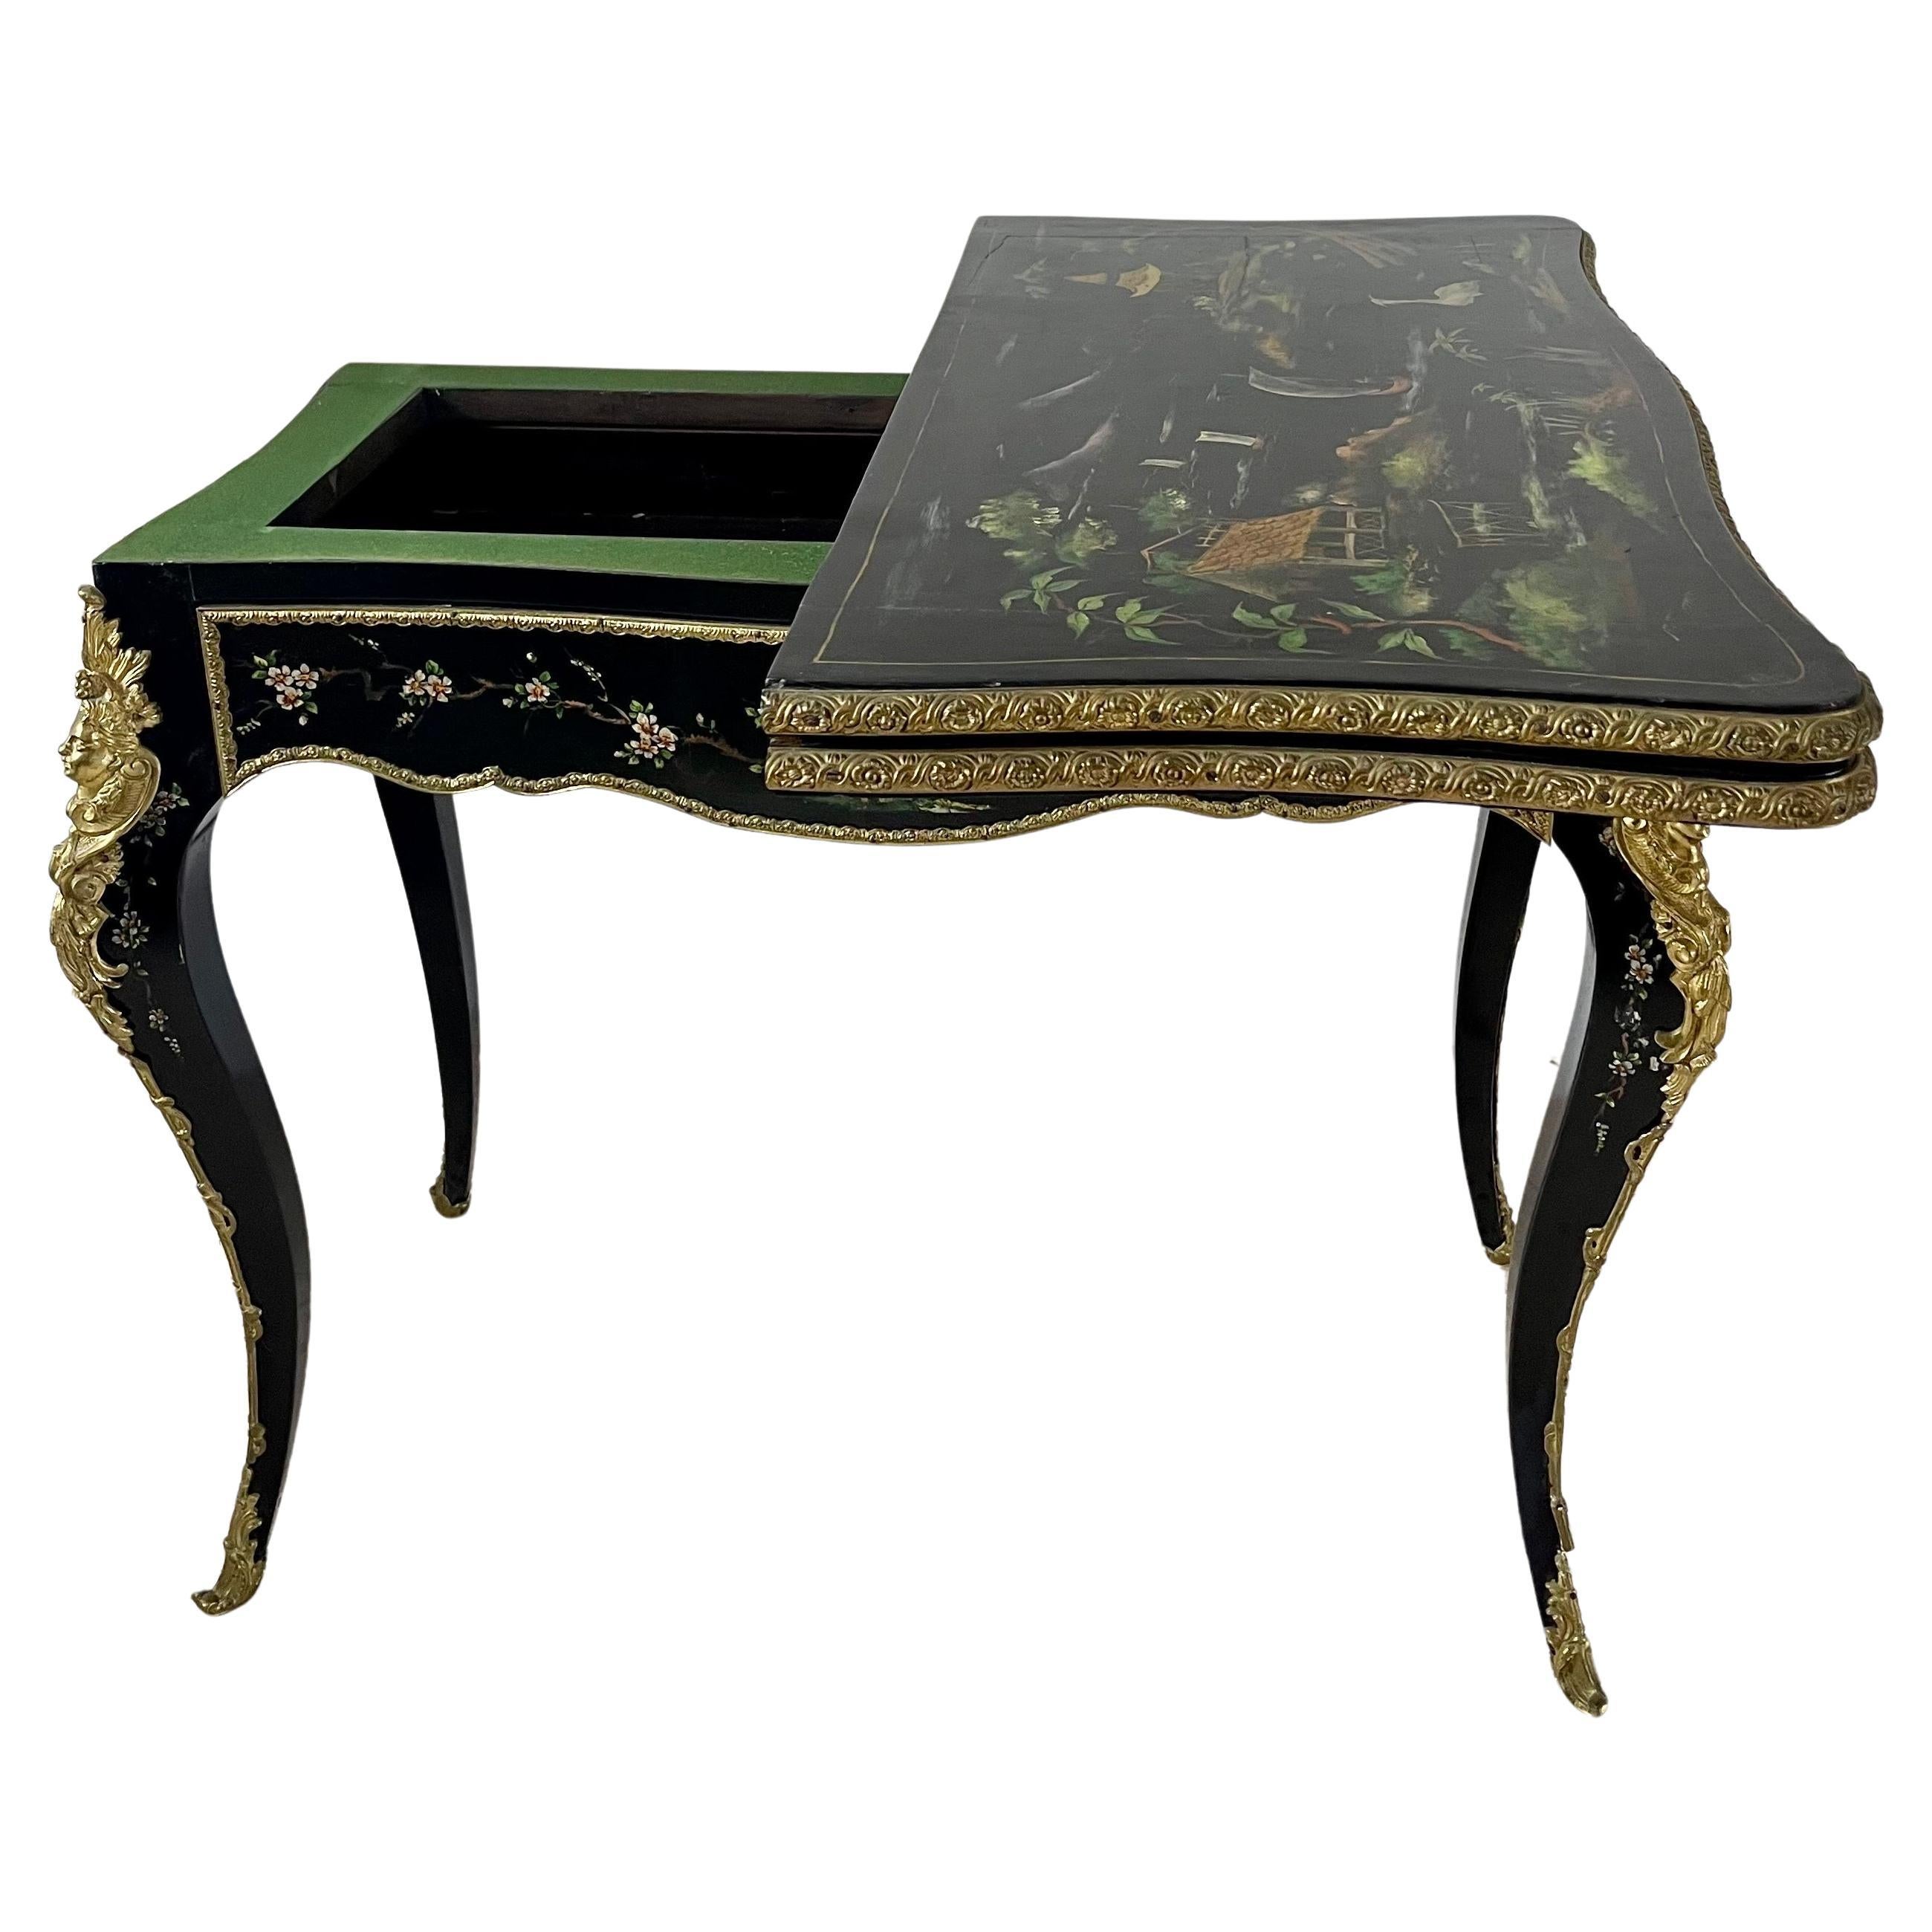 19th century game table console, black lacquer and painted with small colorful flowers.
Bronze ornaments highlight the edges of the table. Finely chiseled characters in gilded bronze are applied to each cabriole foot.
A drawer on the front and a